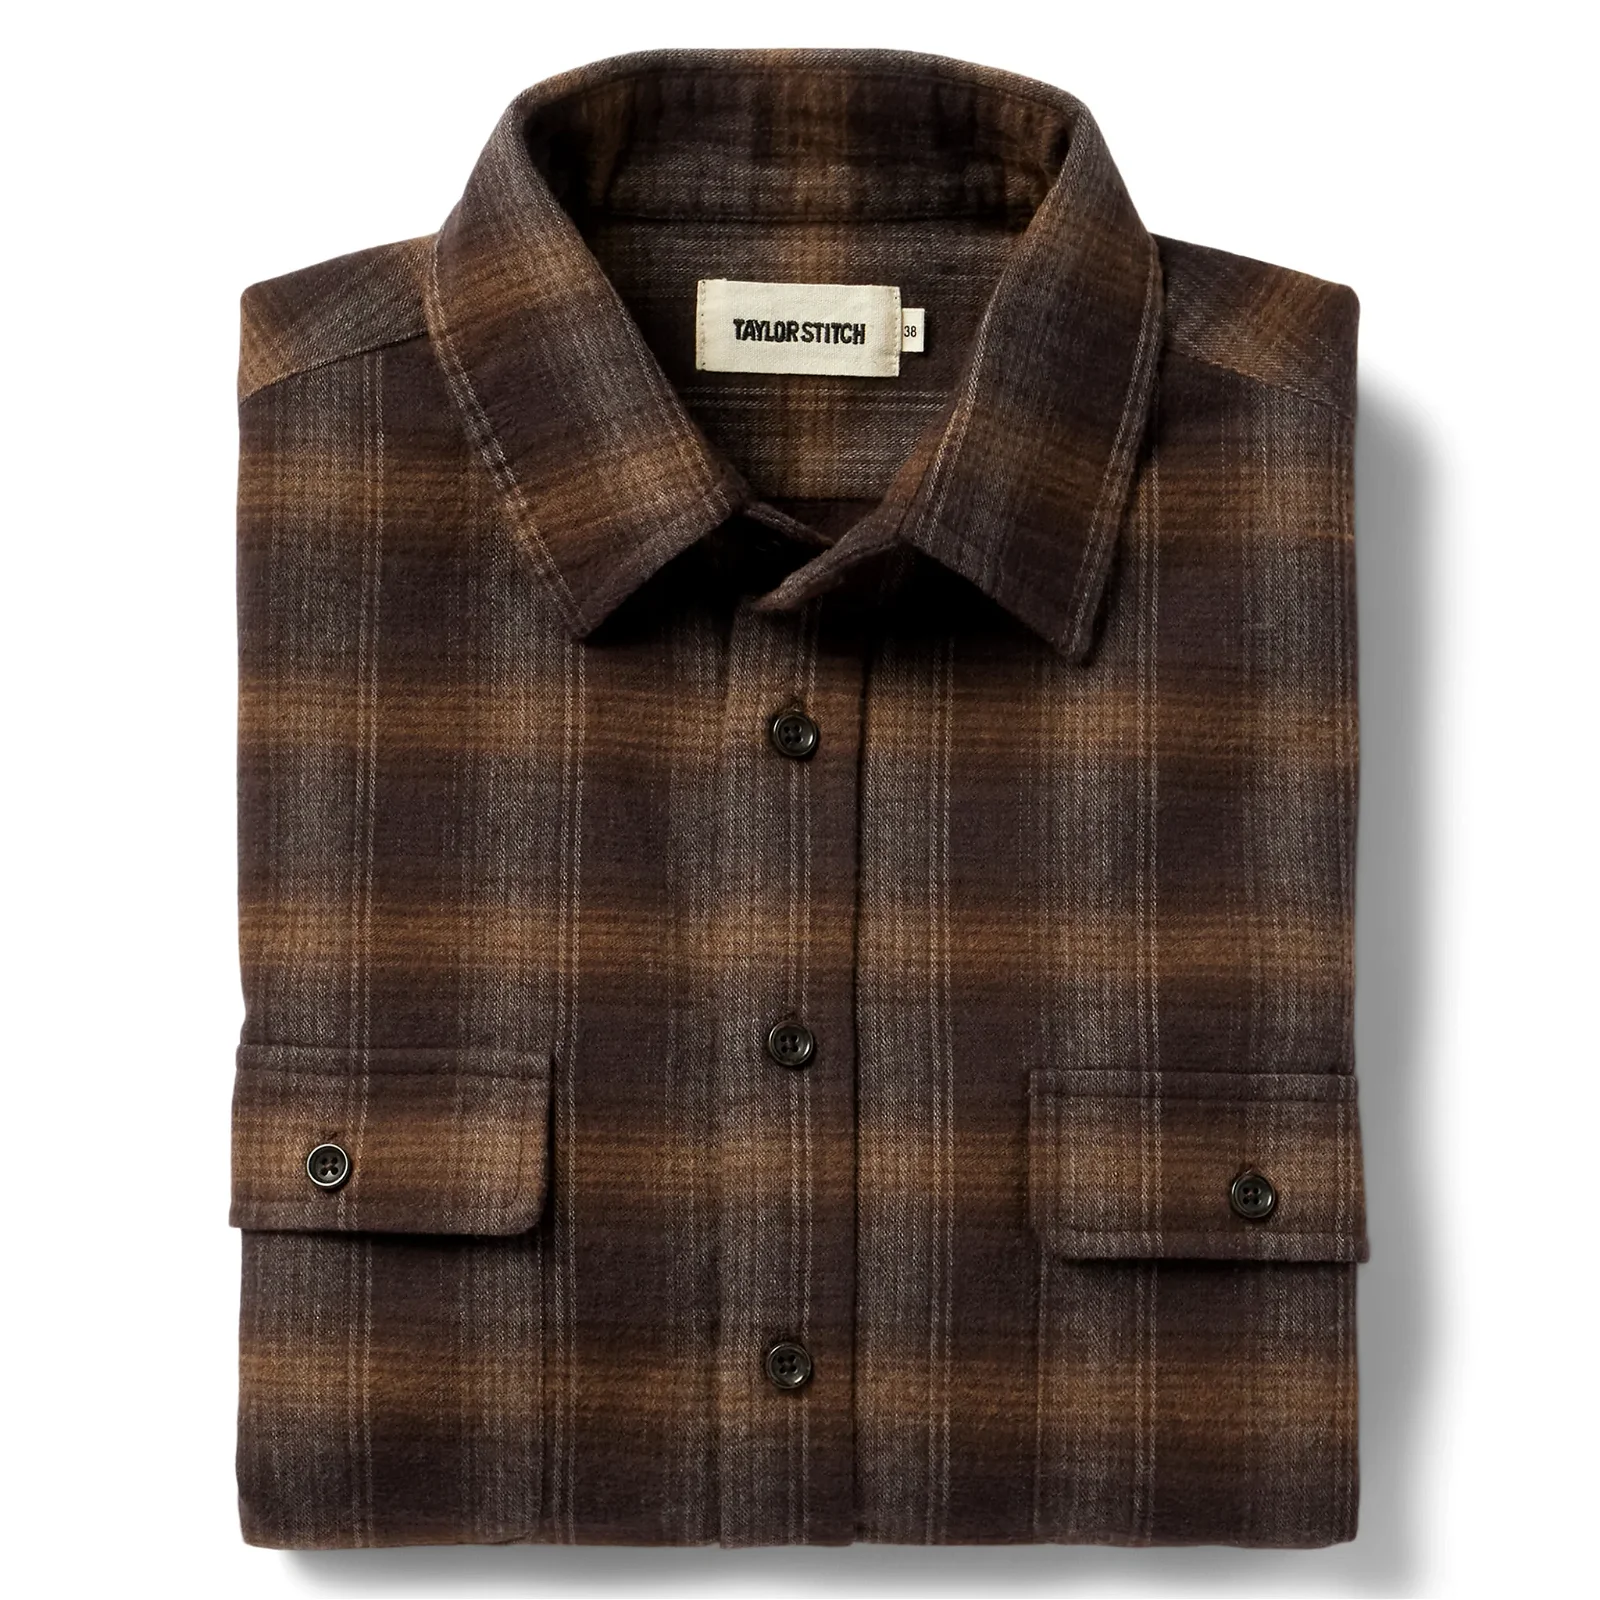 Image of The Yosemite Shirt in Timber Shadow Plaid